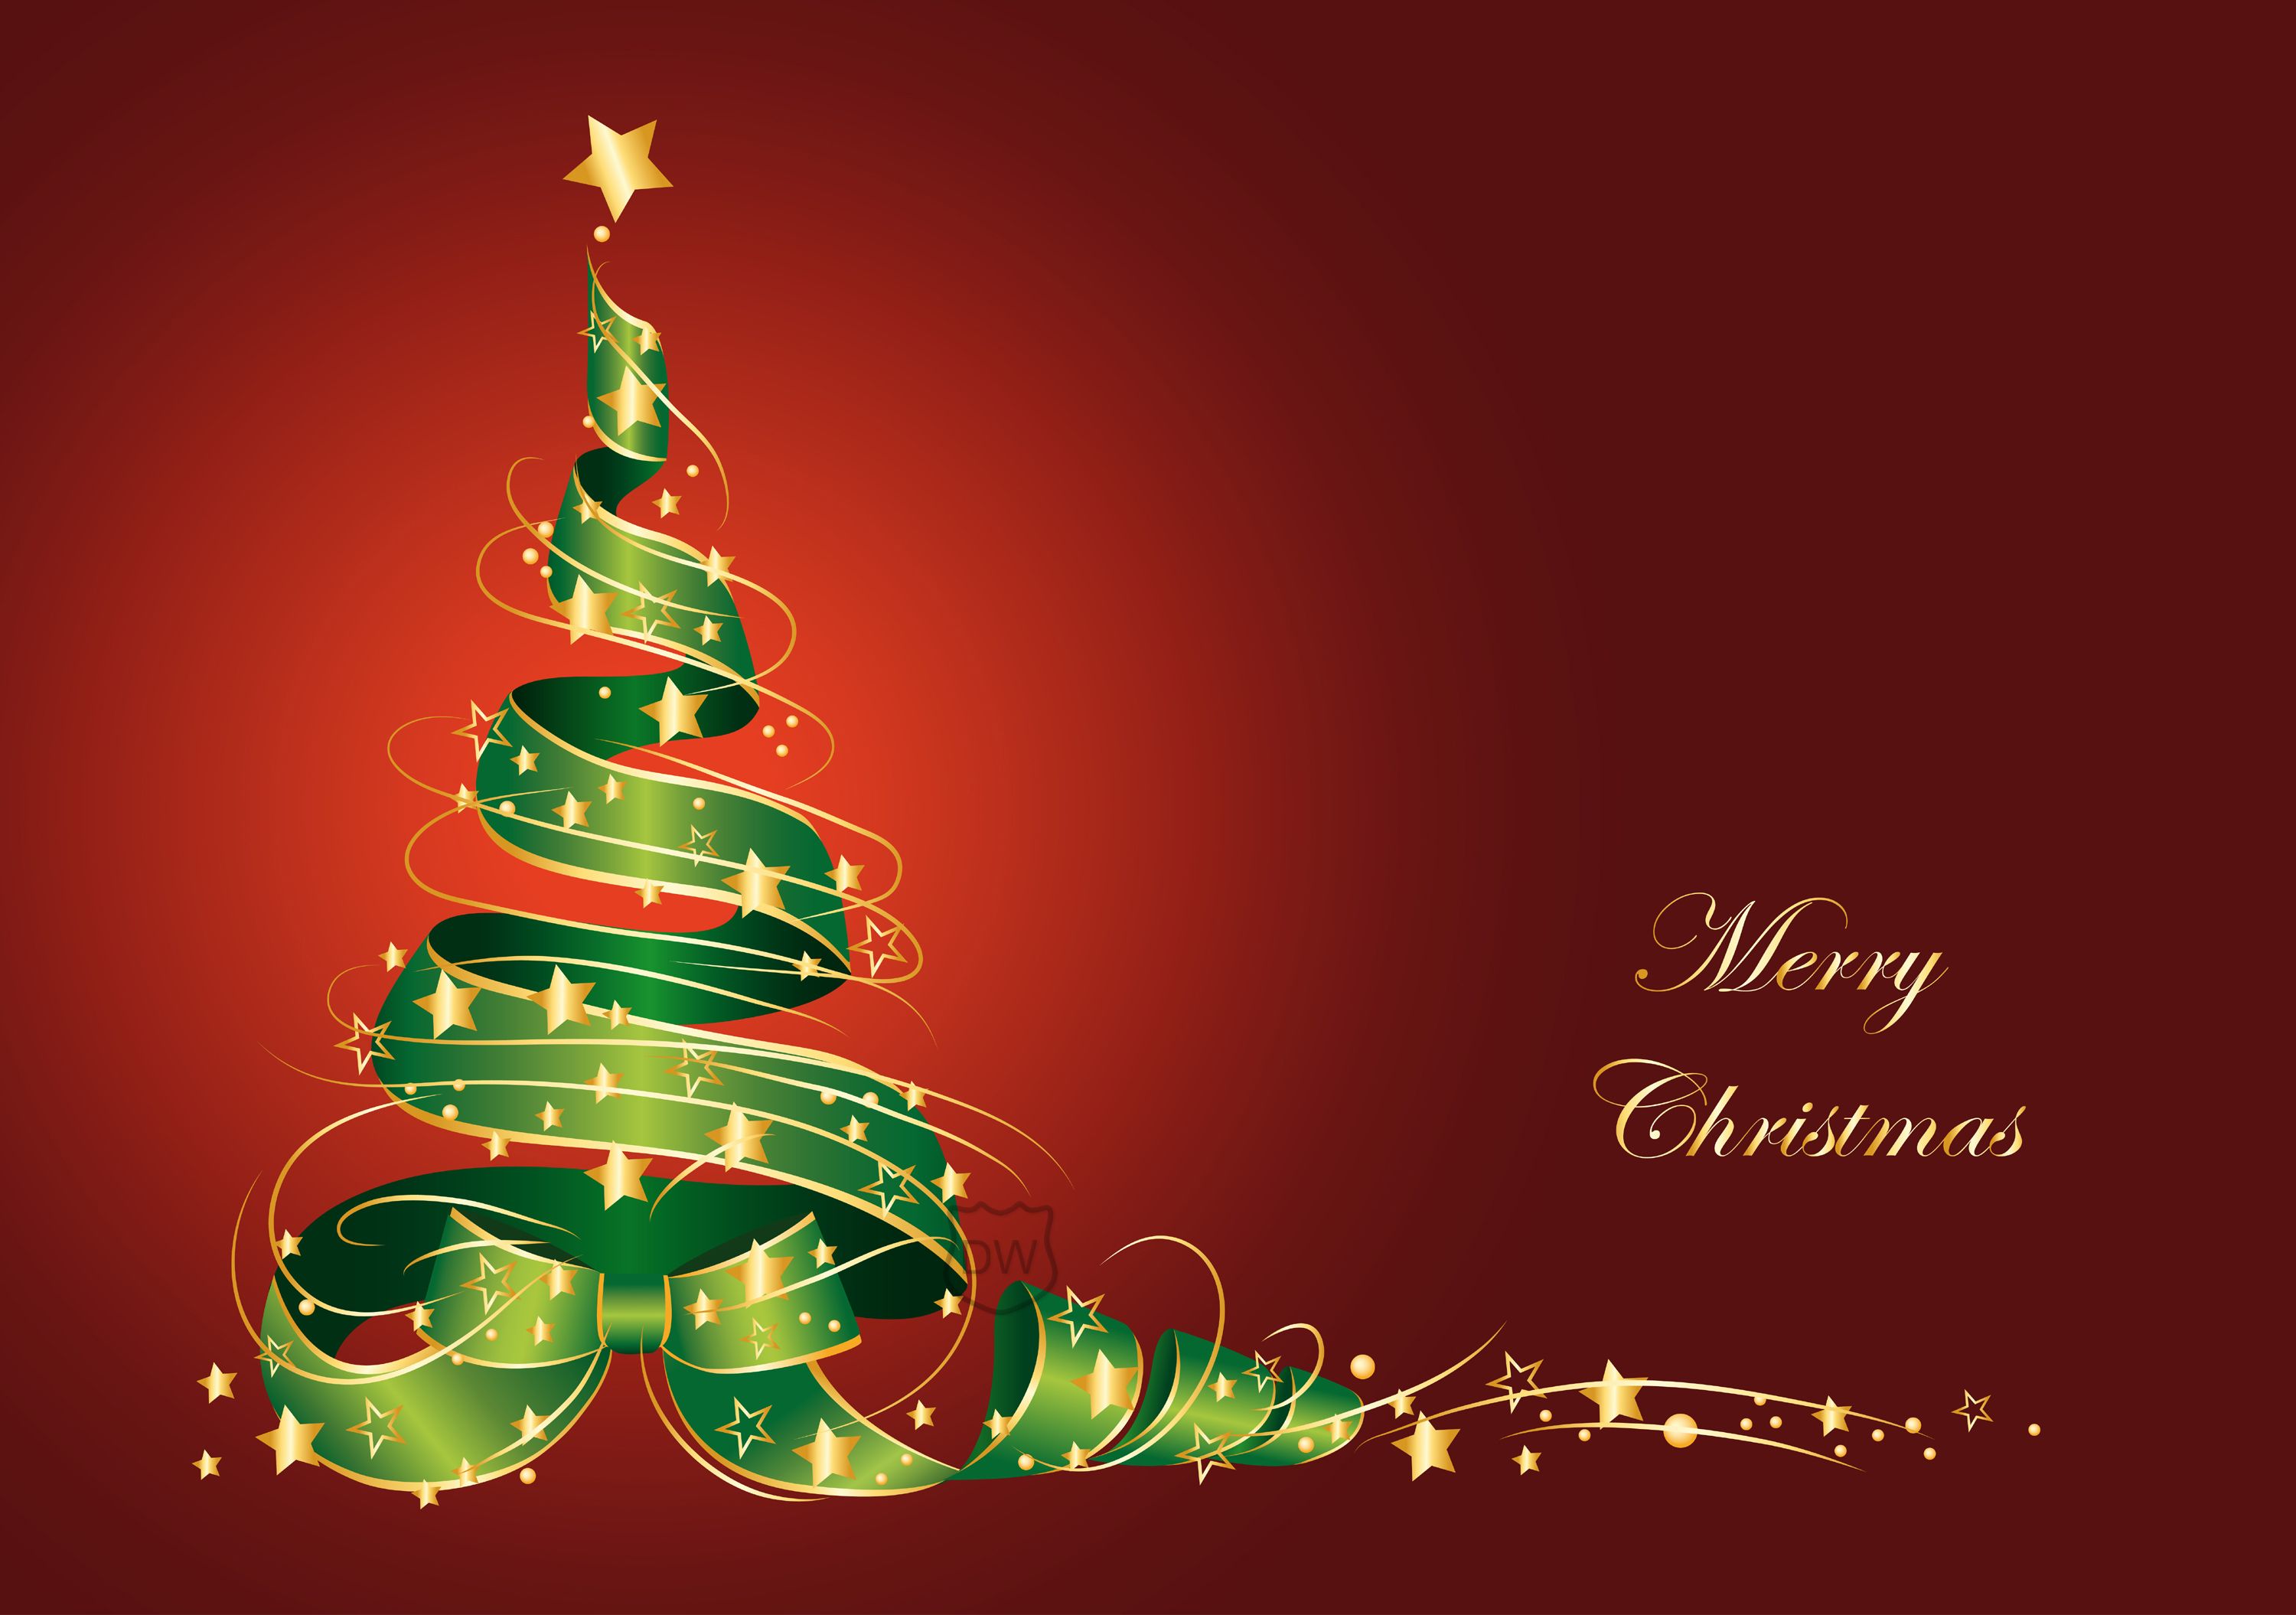 Full HD Merry Christmas Wallpapers | Full HD Pictures